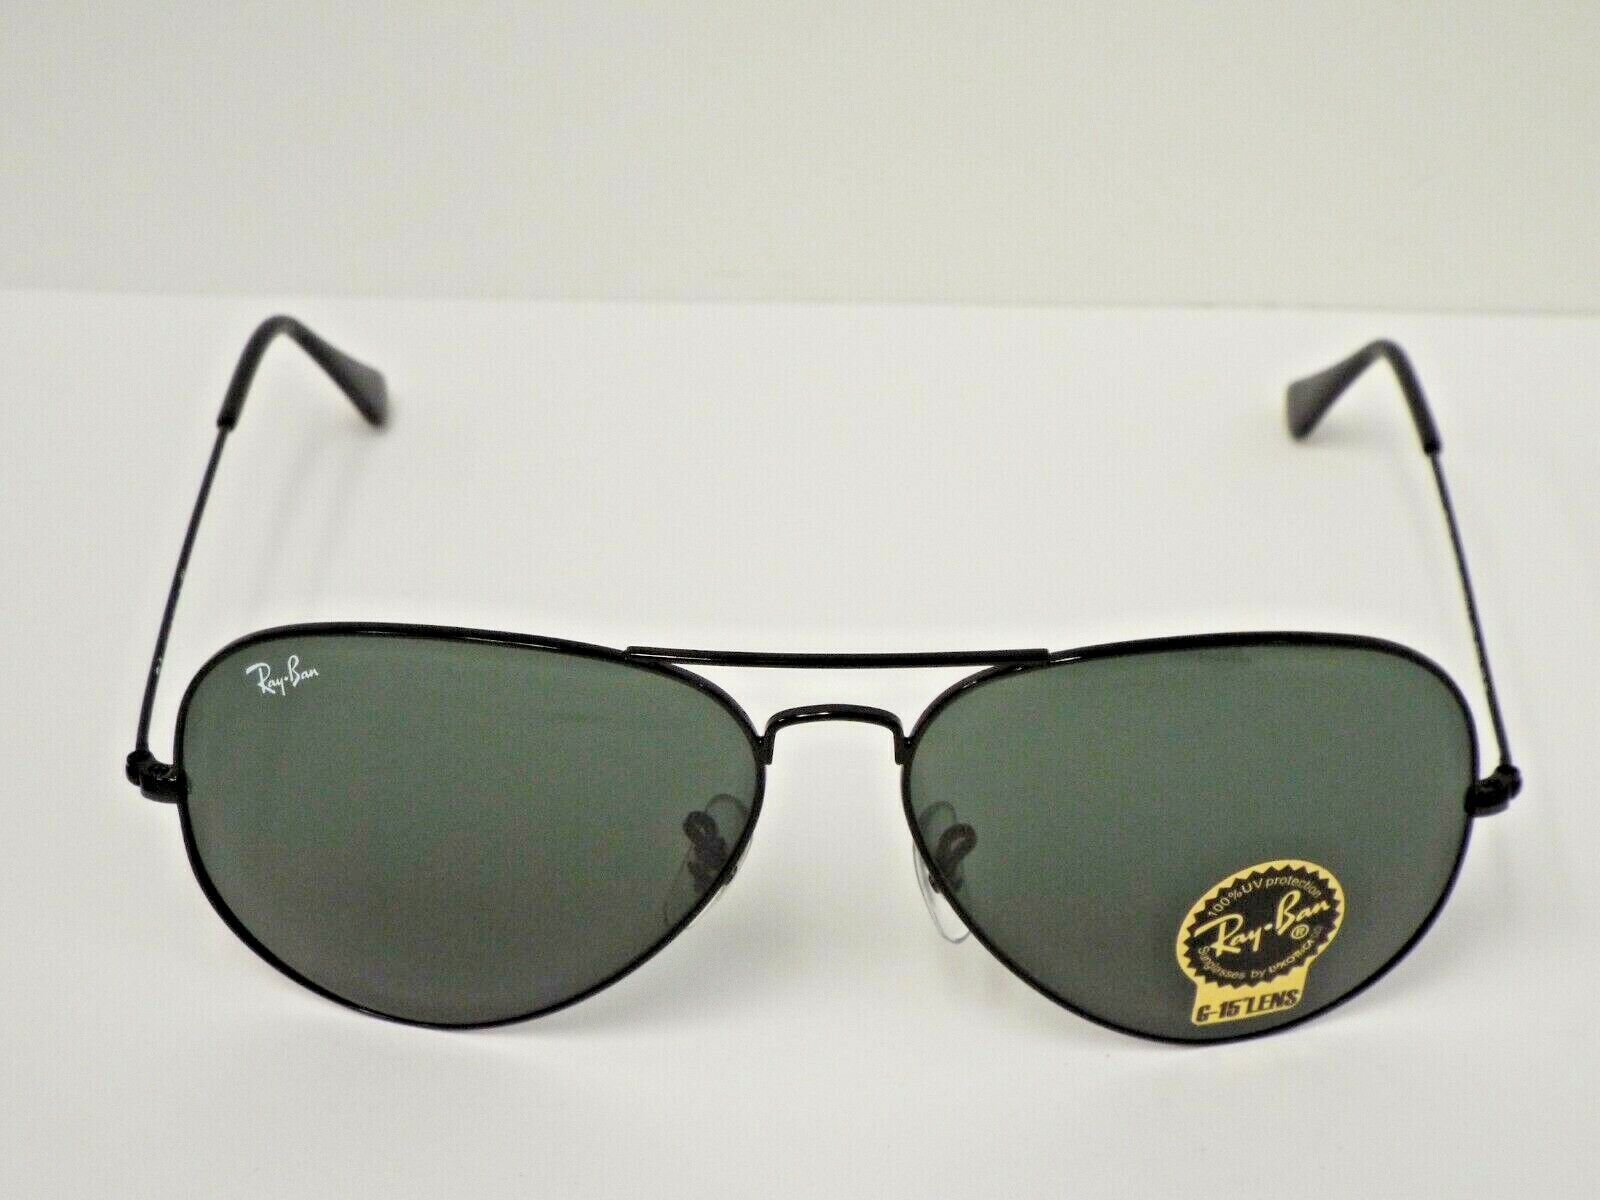 Ray-Ban RB3026 Unisex Sunglasses for sale online | eBay